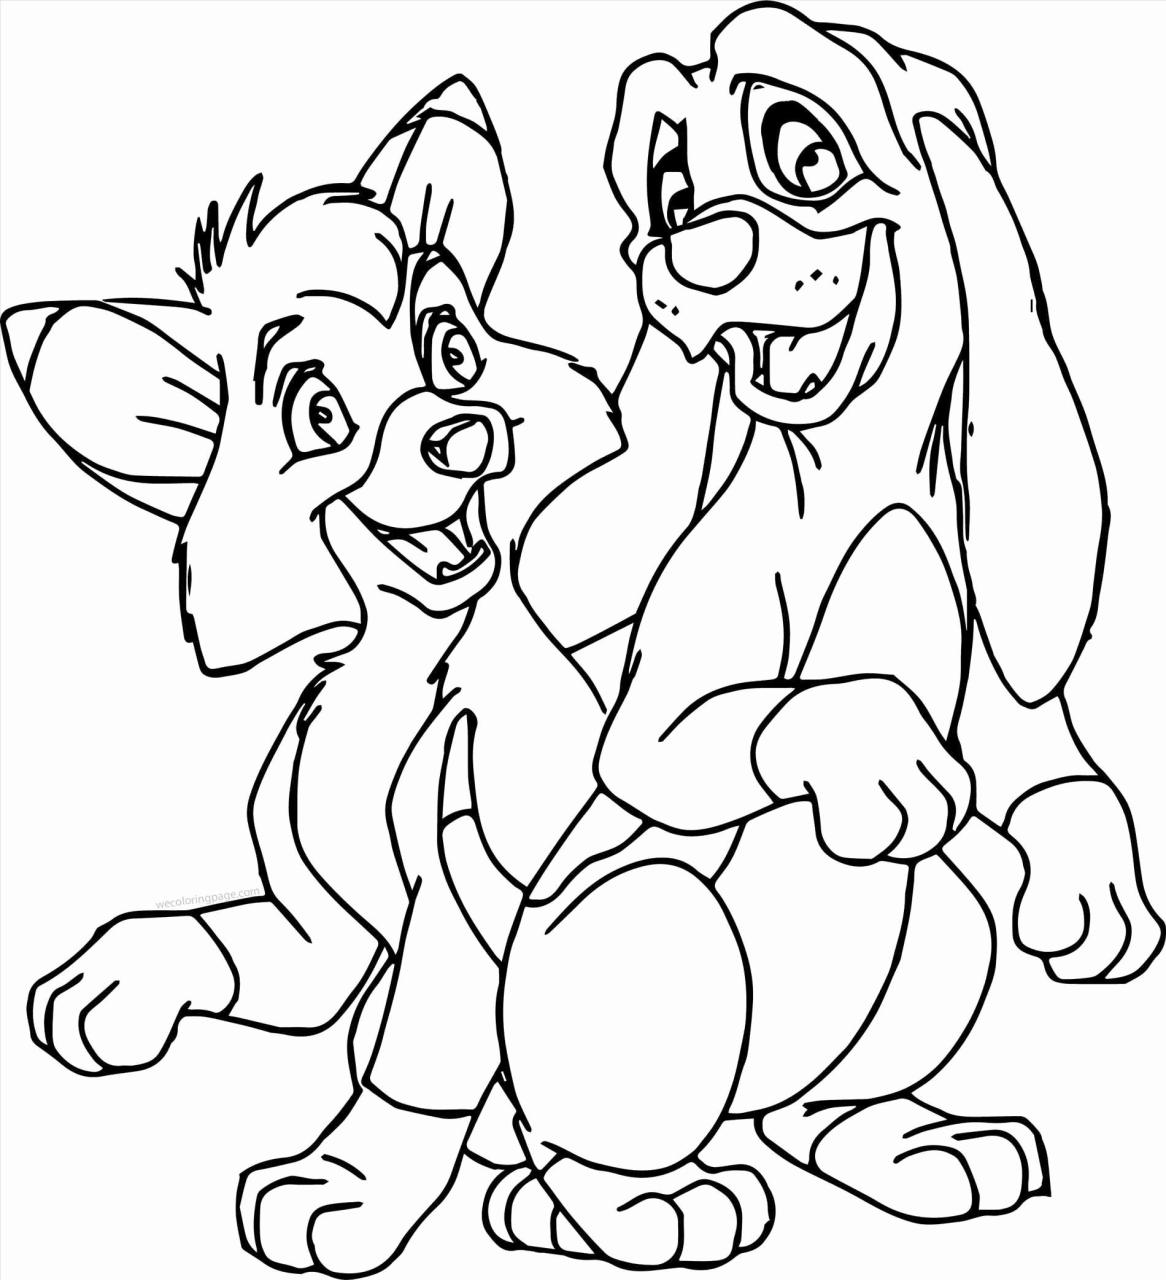 Fox and the Hound Coloring Pages Best Coloring Pages For Kids